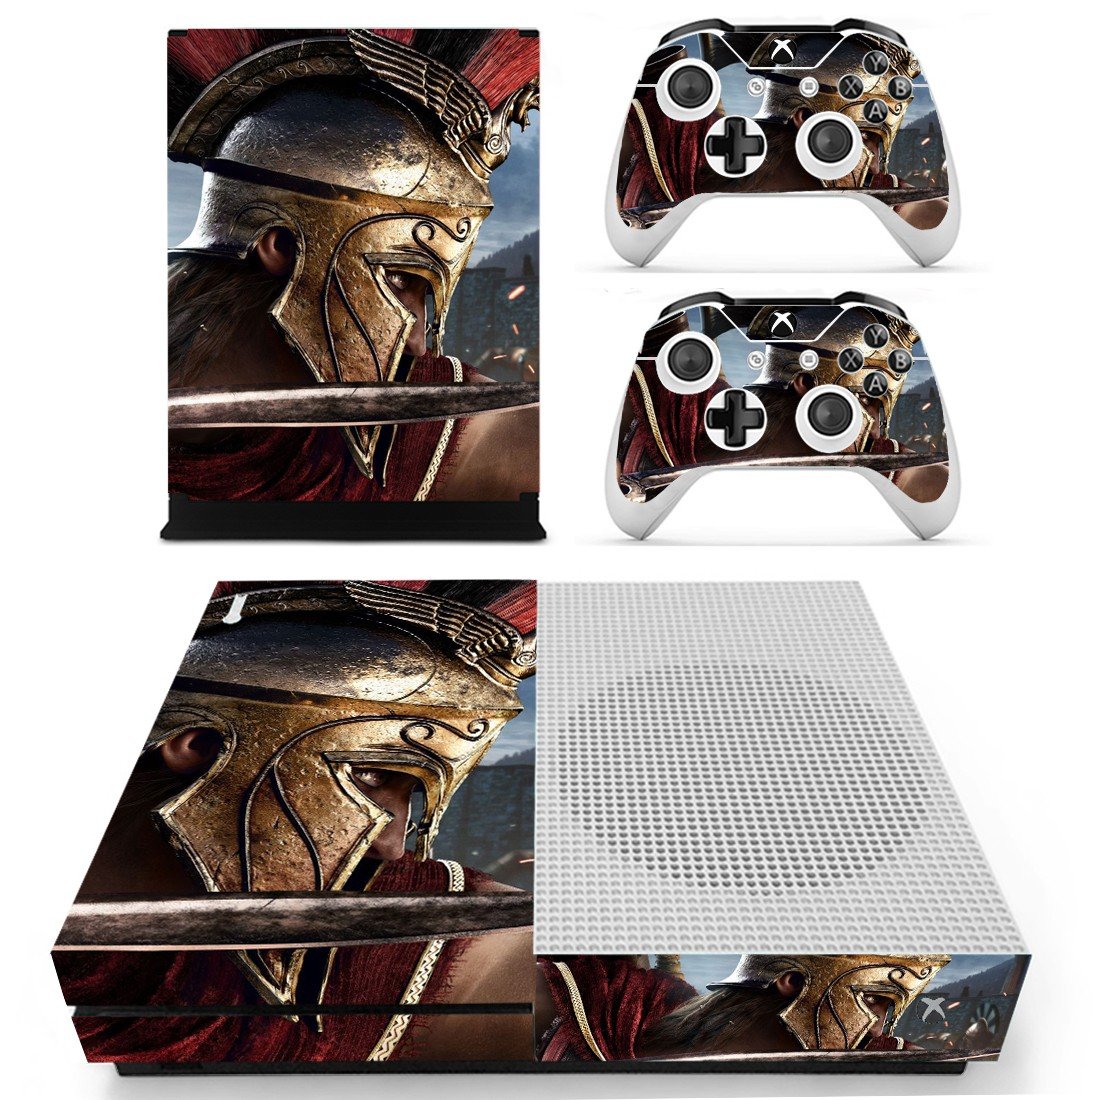 Assassin's Creed Odyssey Cover For Xbox One S Design 9